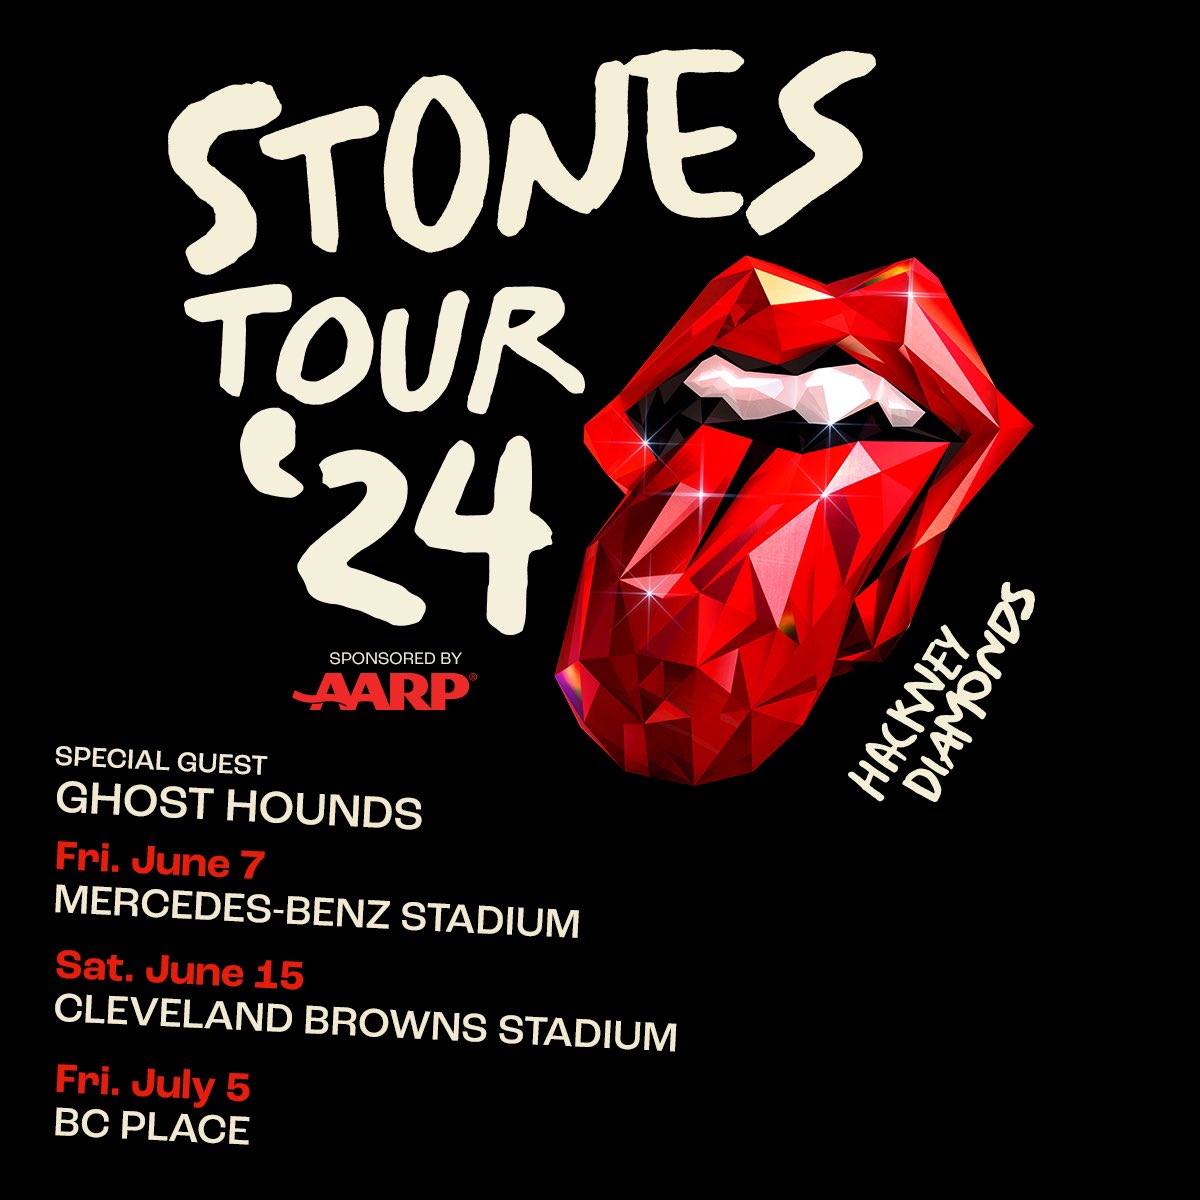 We grew up admiring the artistry and musicianship of @RollingStones and to be able to share a stage with them again leaves us beyond words. We’ll see you this summer!